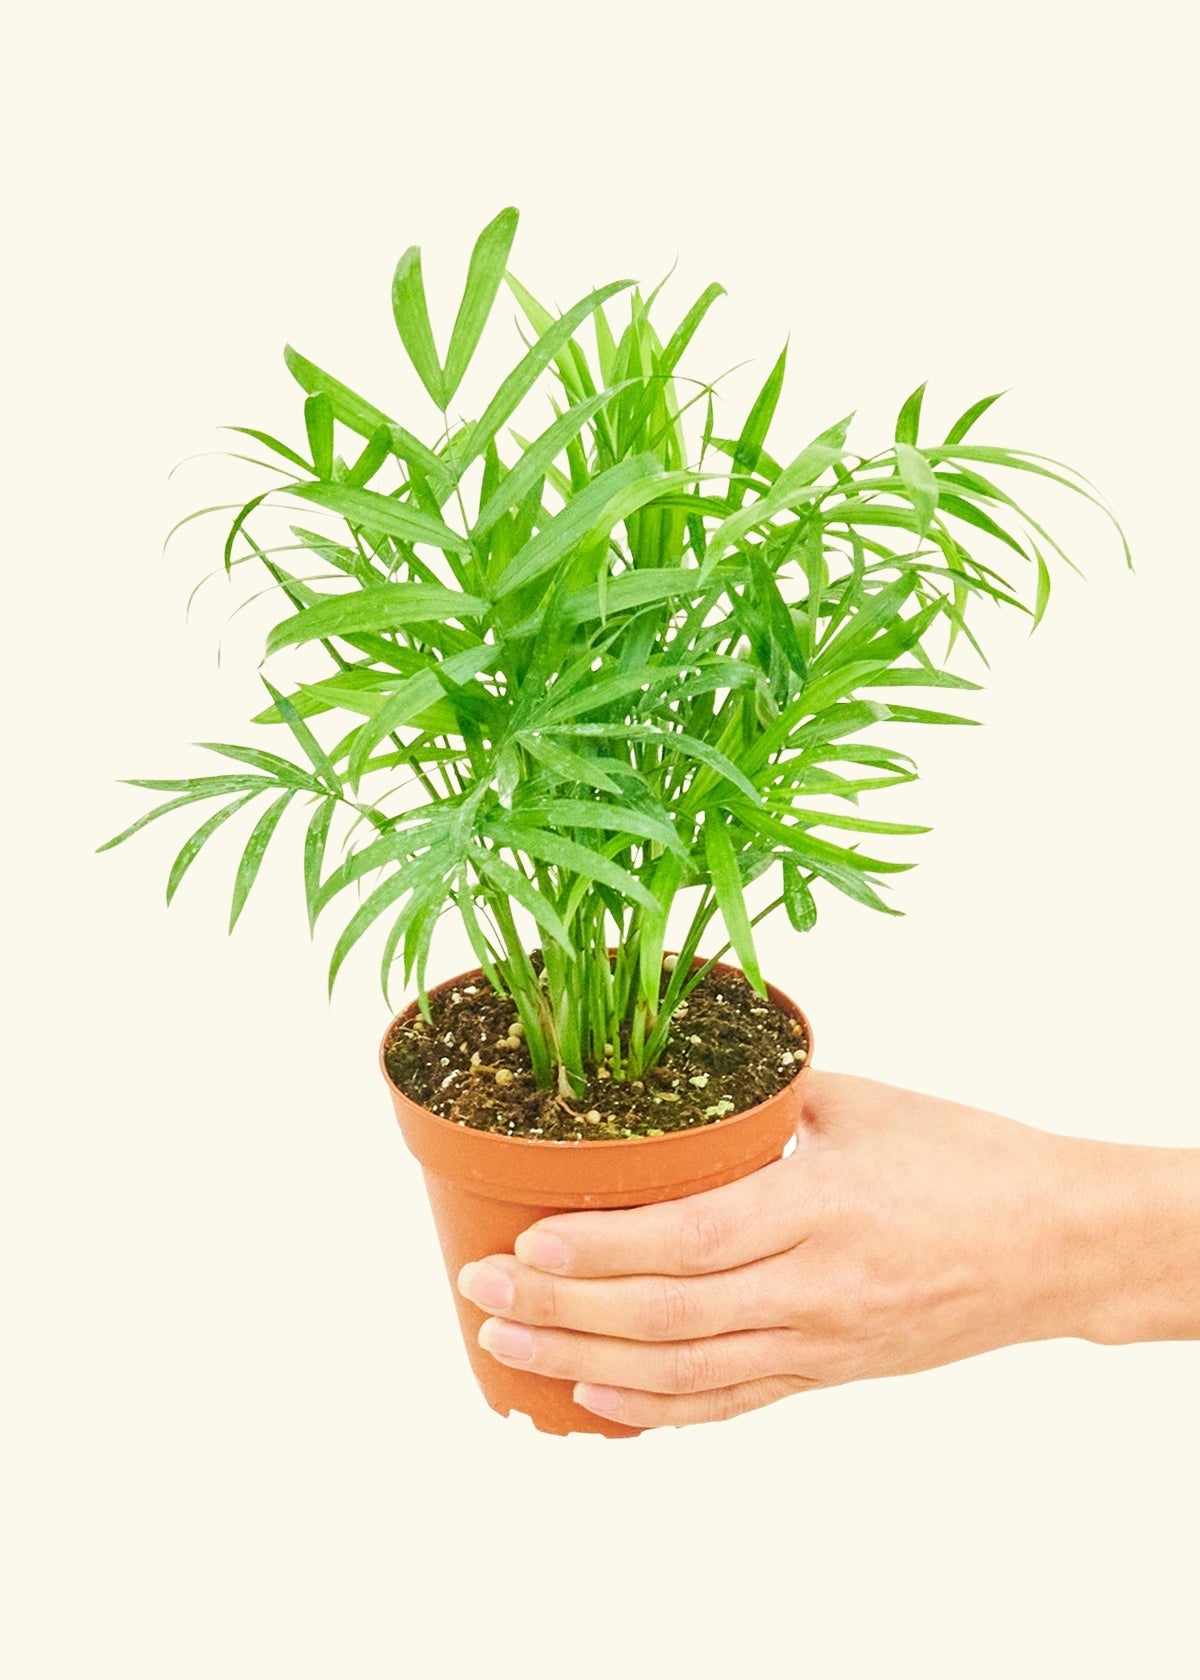 Small Parlor Palm (Chamaedorea elegans) in a grow pot.